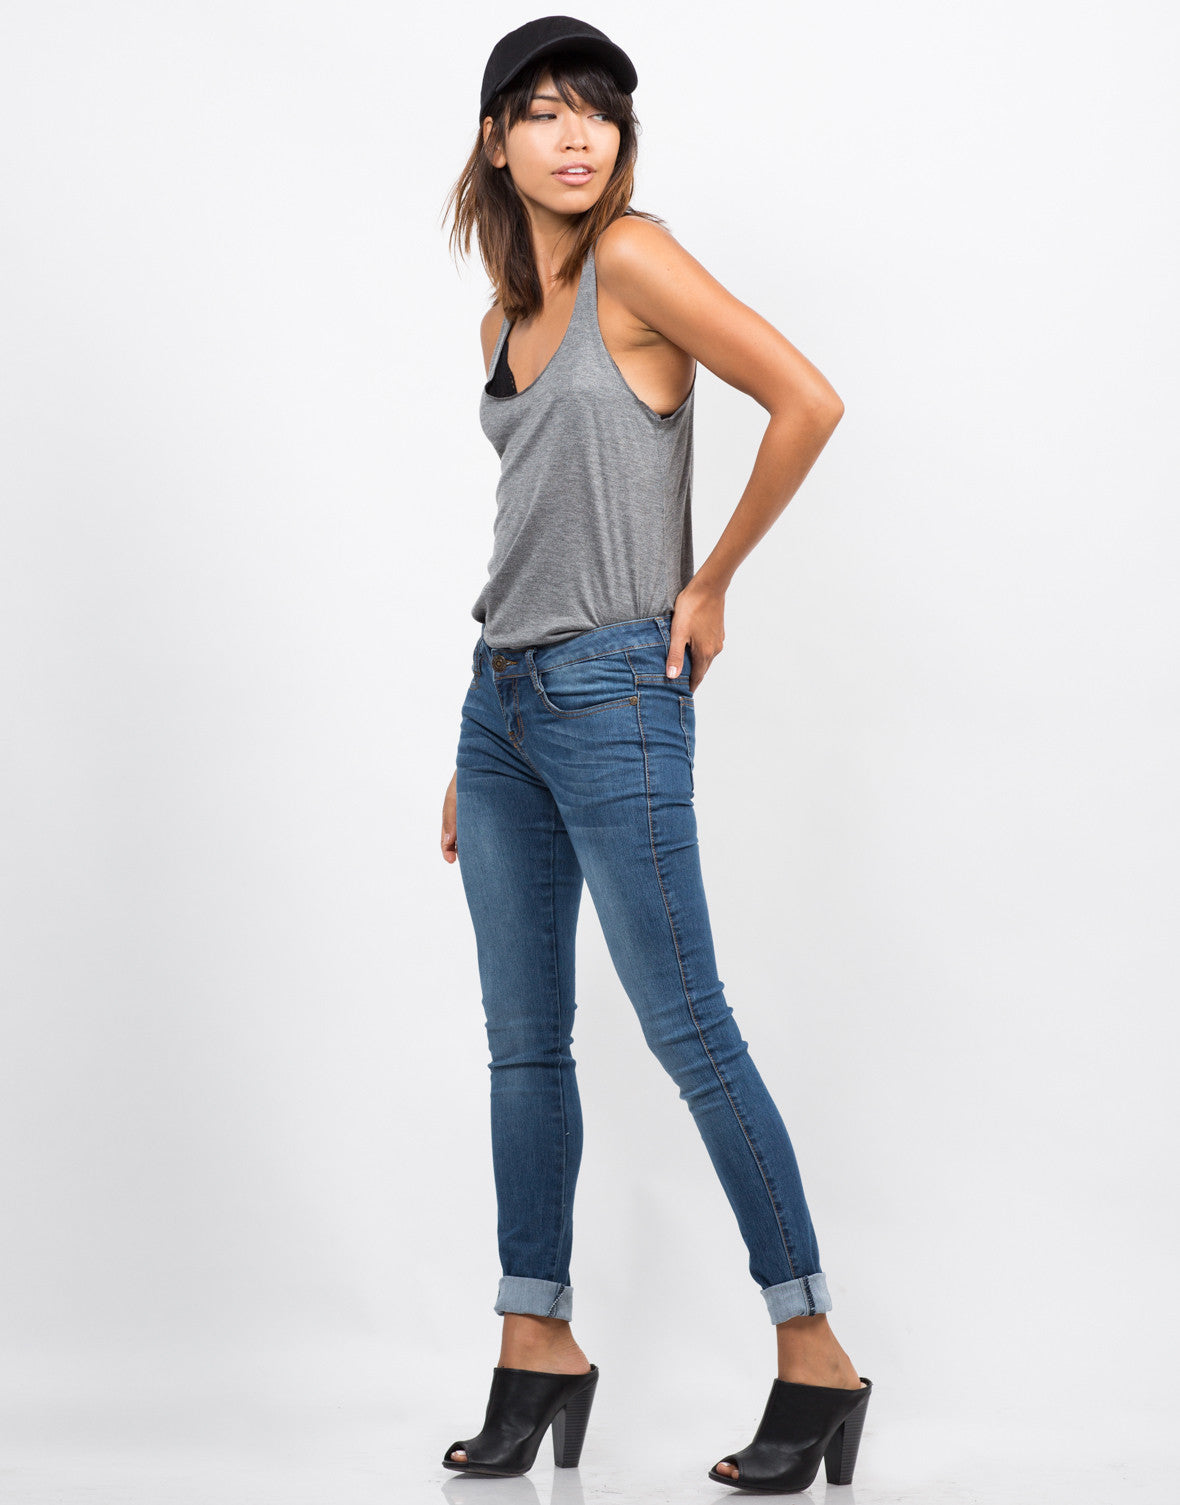 classic-blue-skinny-jeans-blue-denim-faded-jeans-2020ave